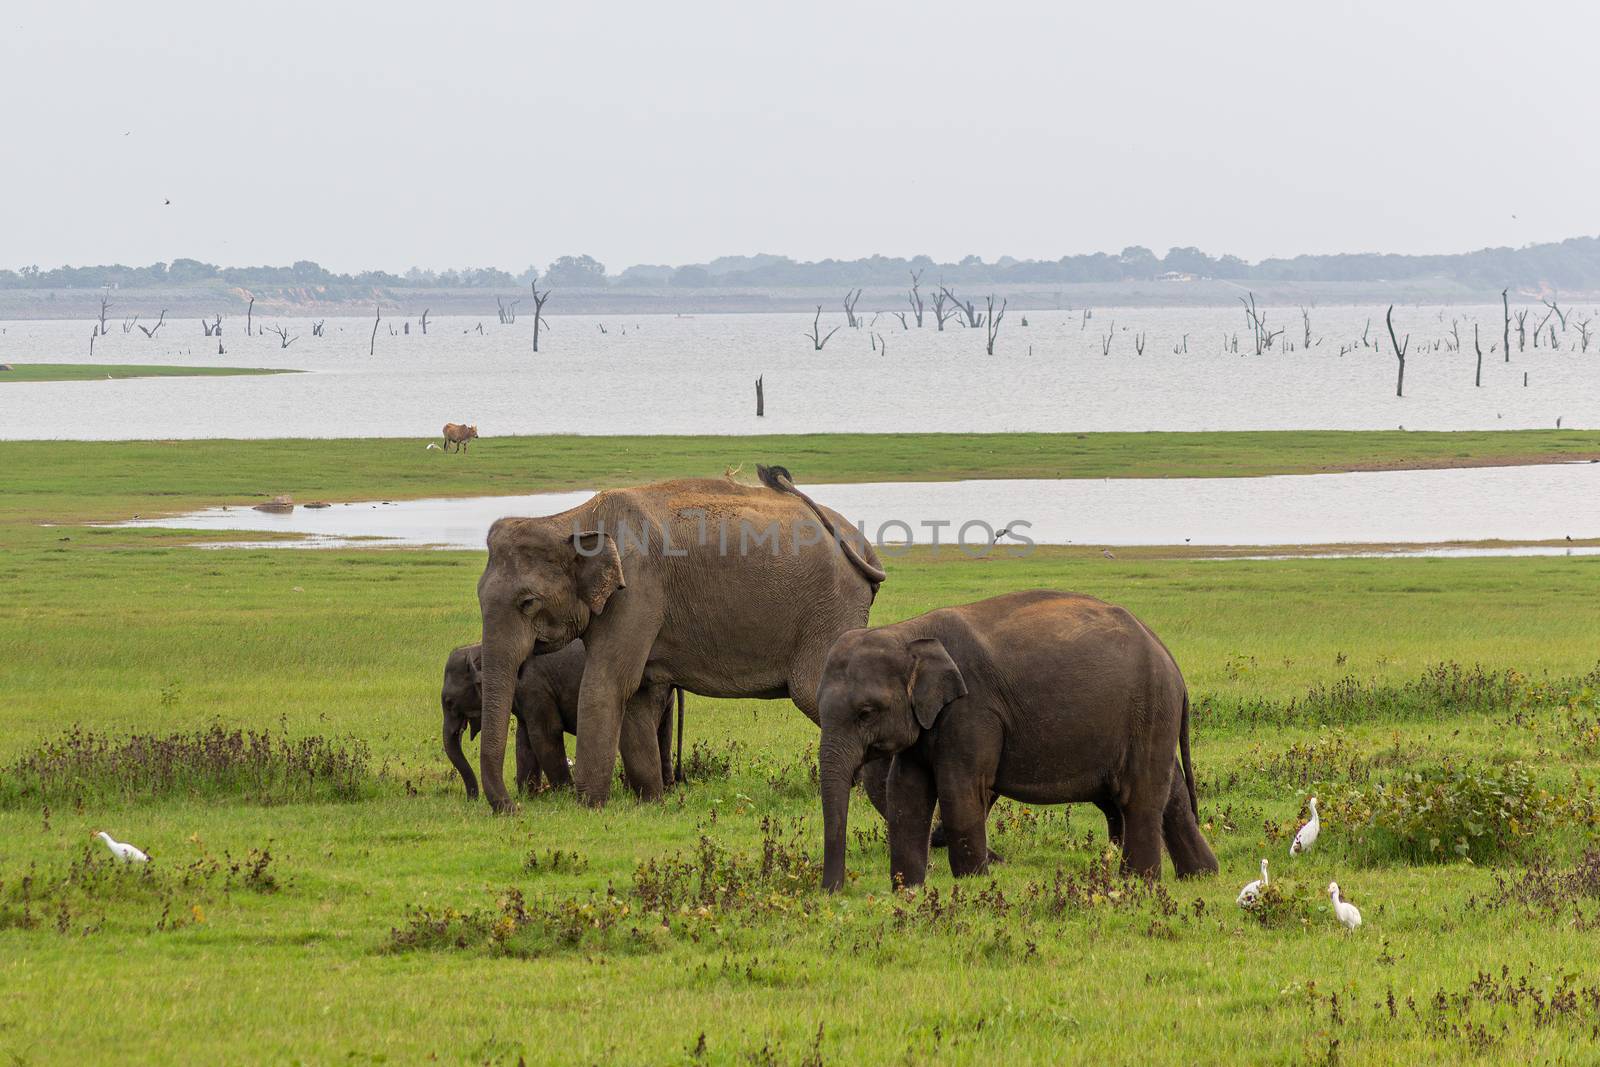 Two Baby elephants with mother and savanna birds on a green field relaxing. Concept of animal care, travel and wildlife observation.